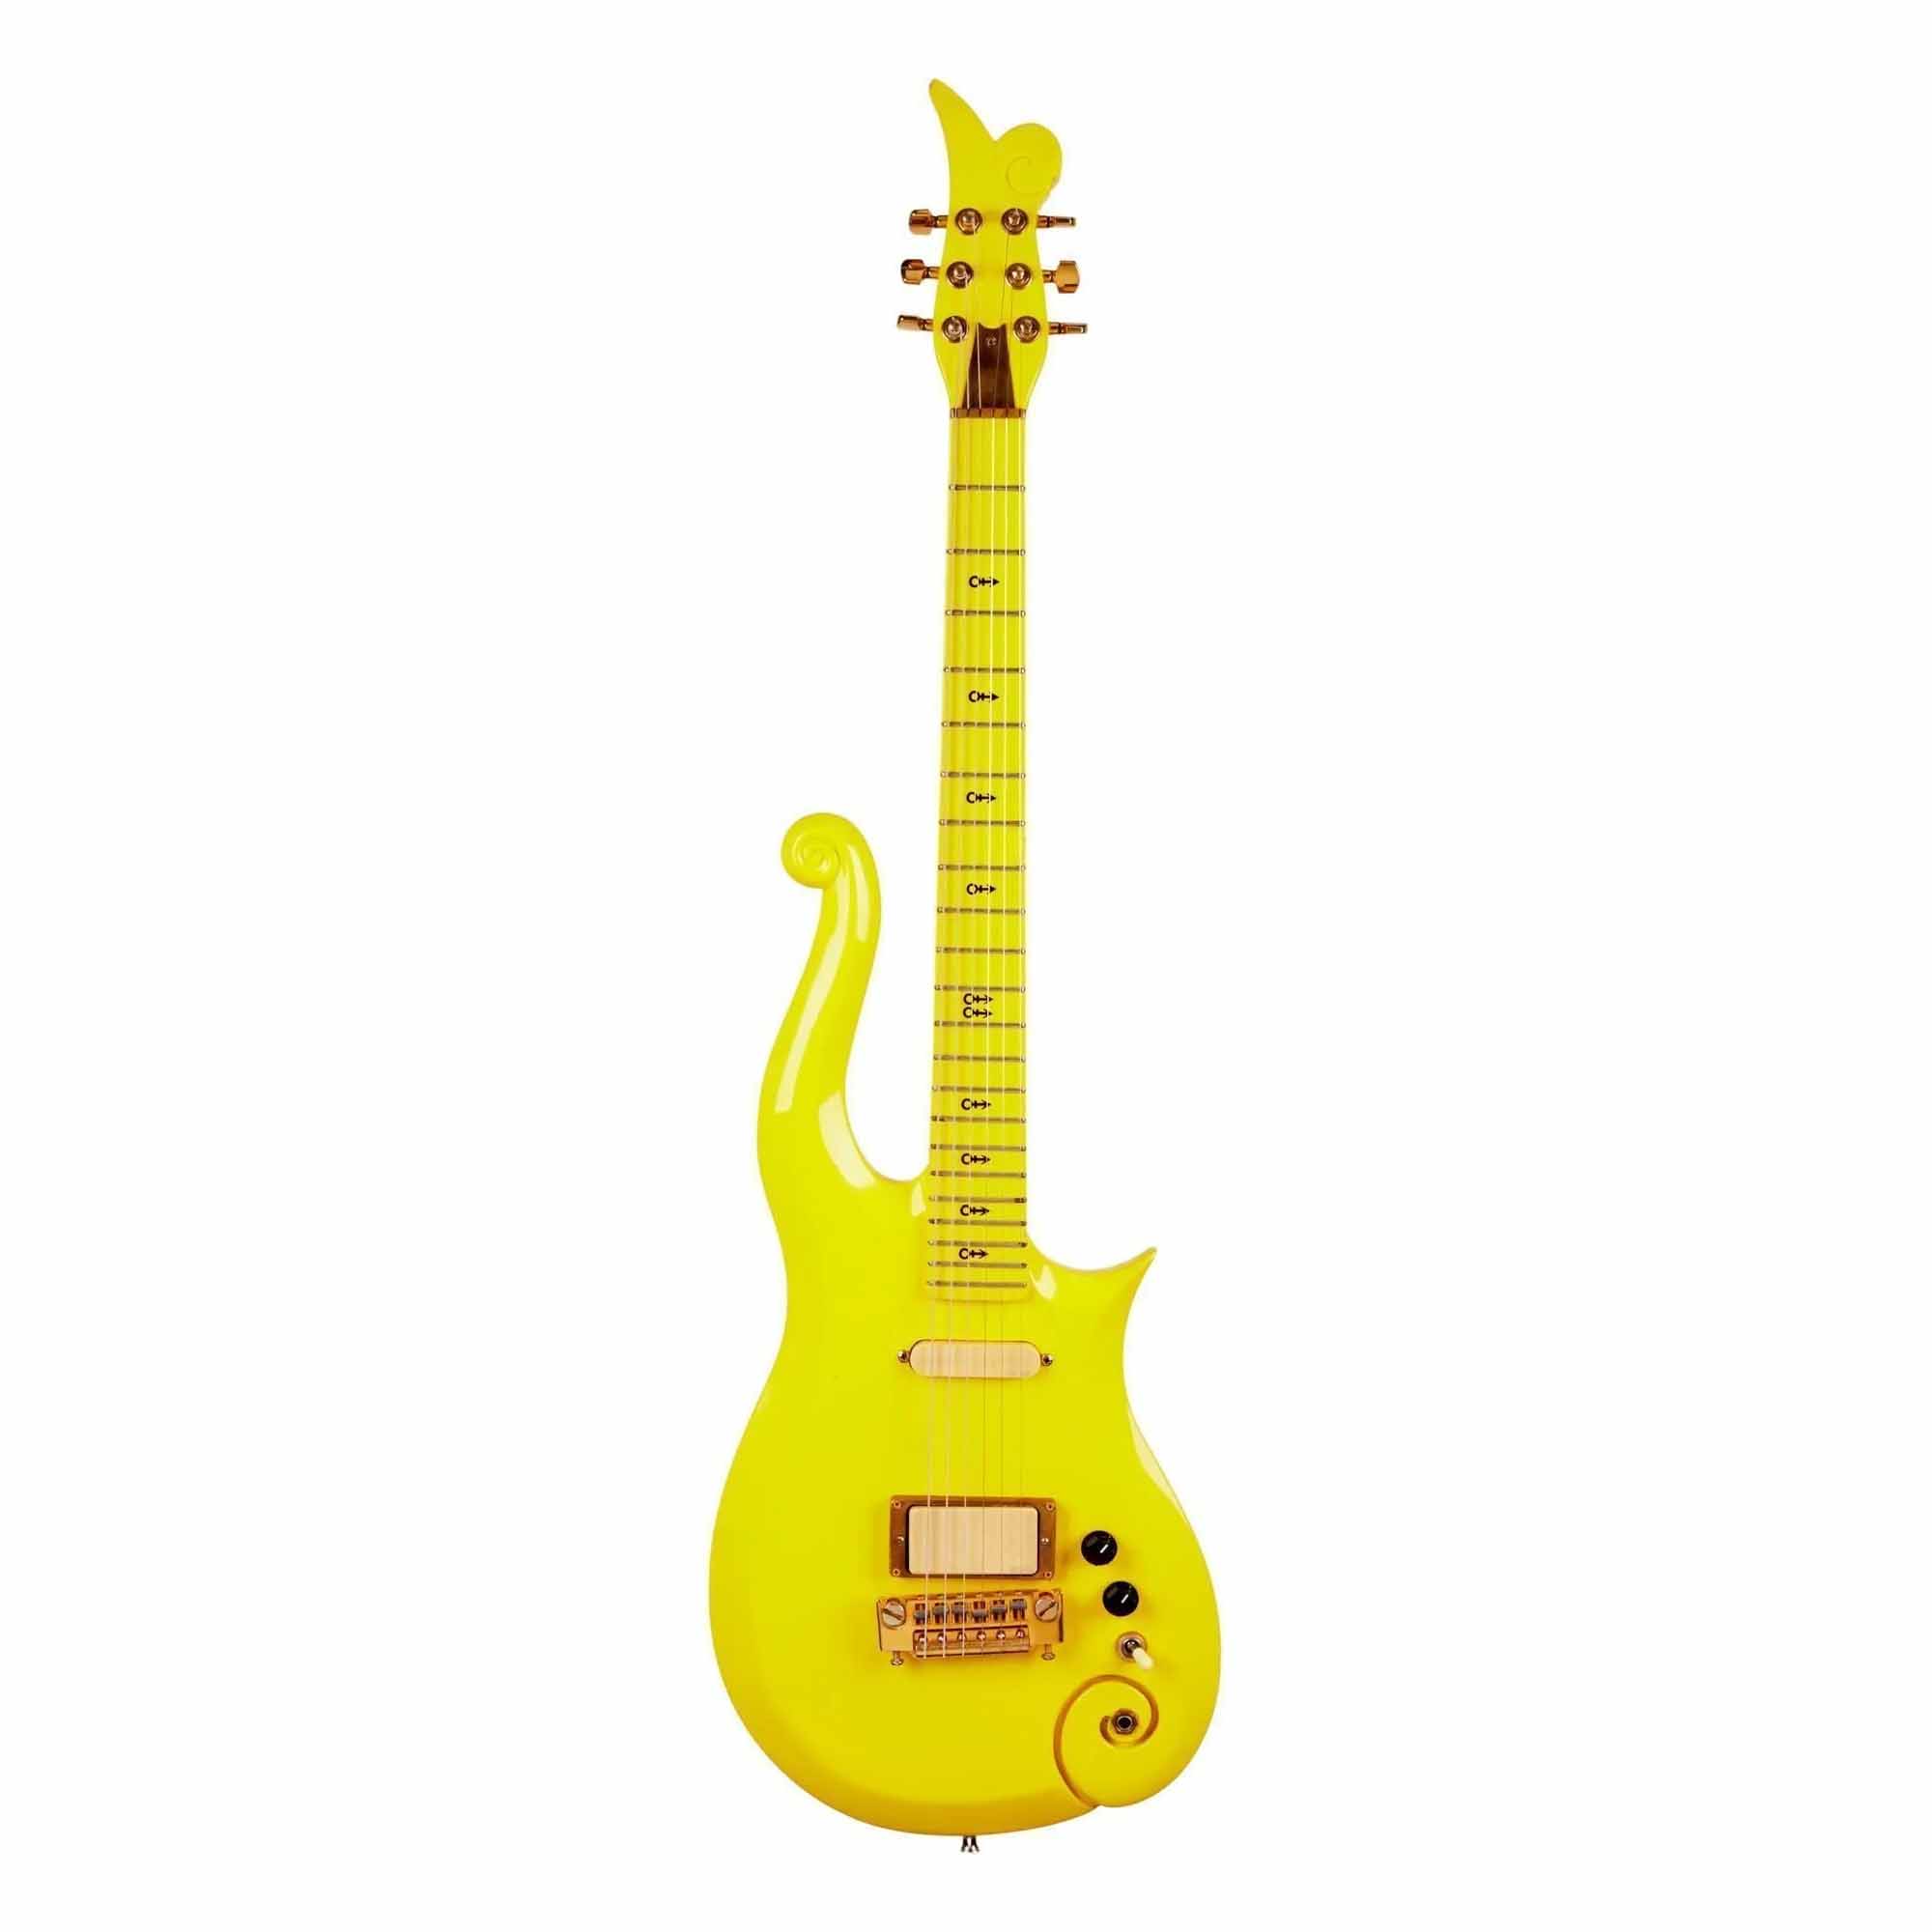 Prince's Cloud 3 Electric Guitar, estimated at $400,000-$600,000 at Julien's.